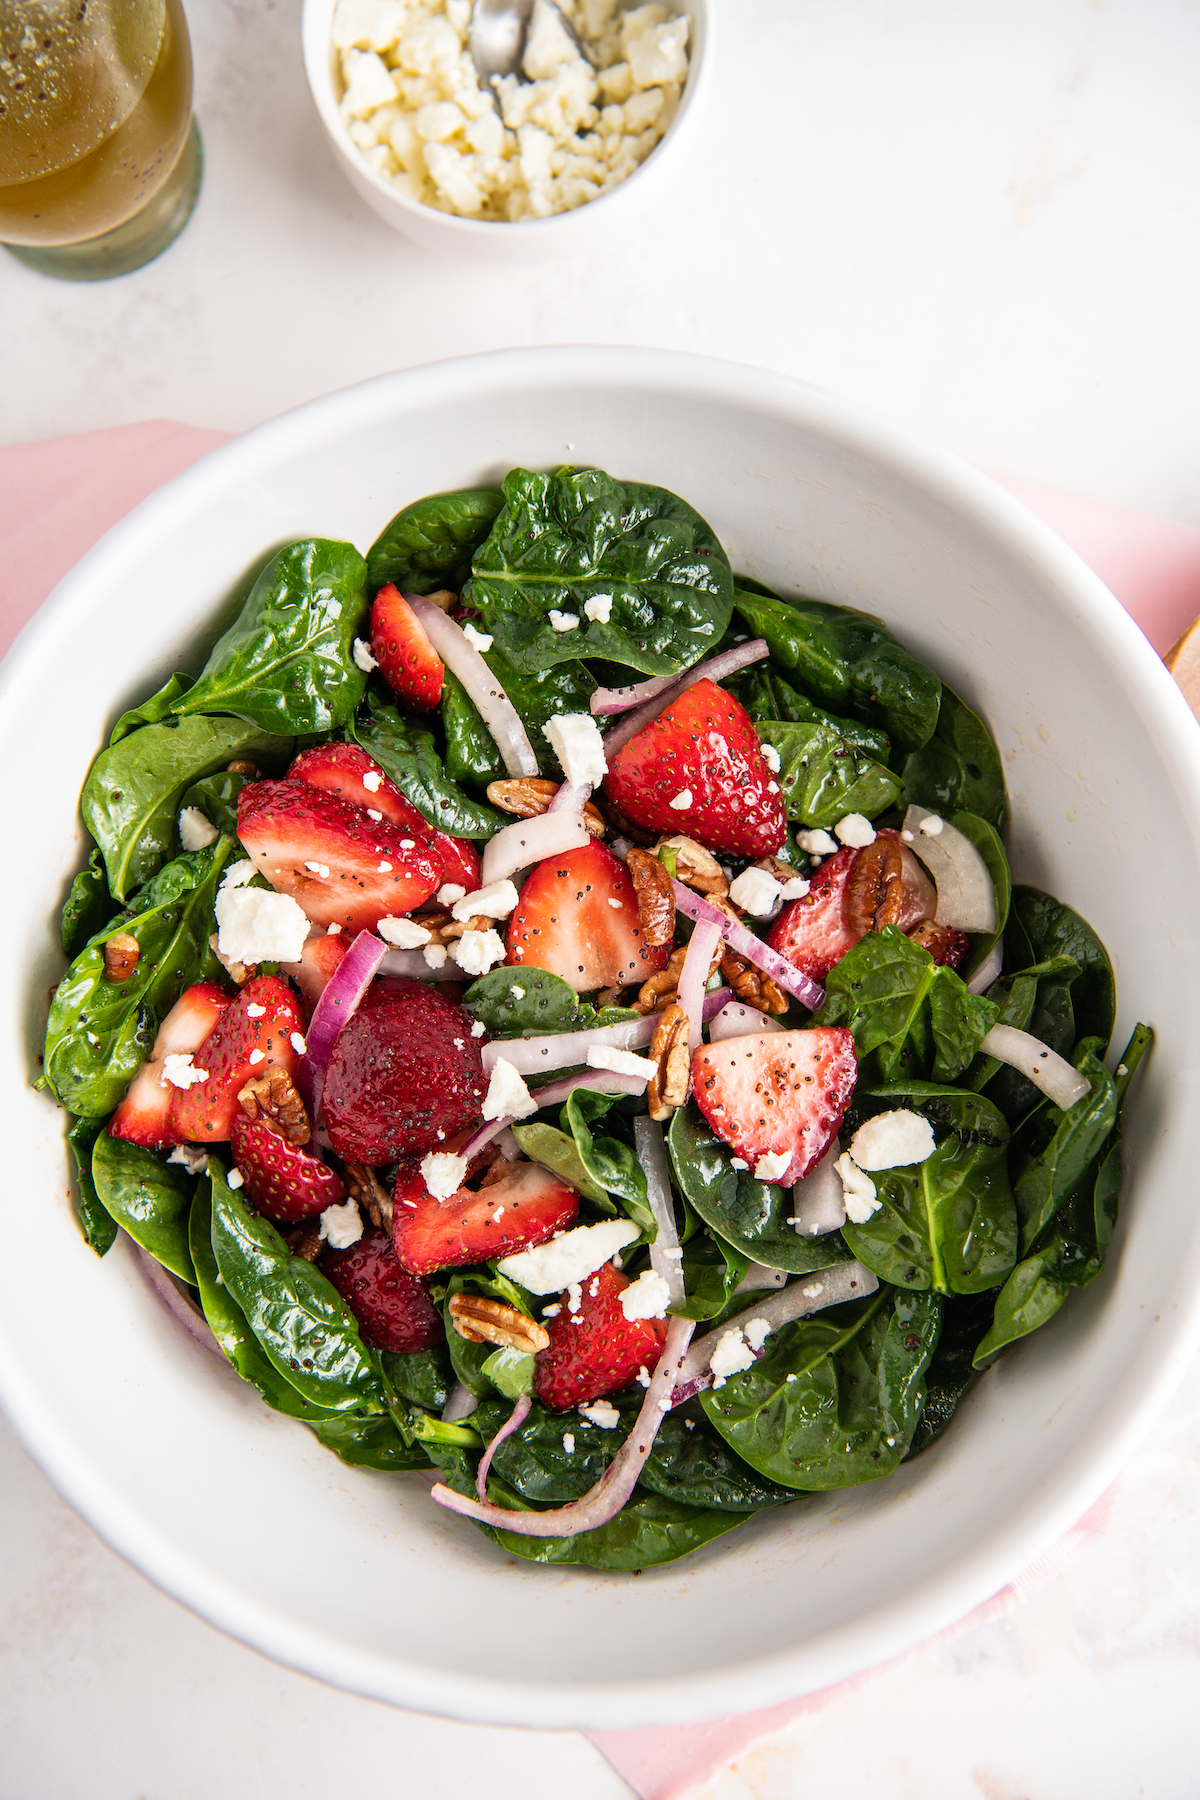 Spinach and strawberry salad topped with feta cheese.